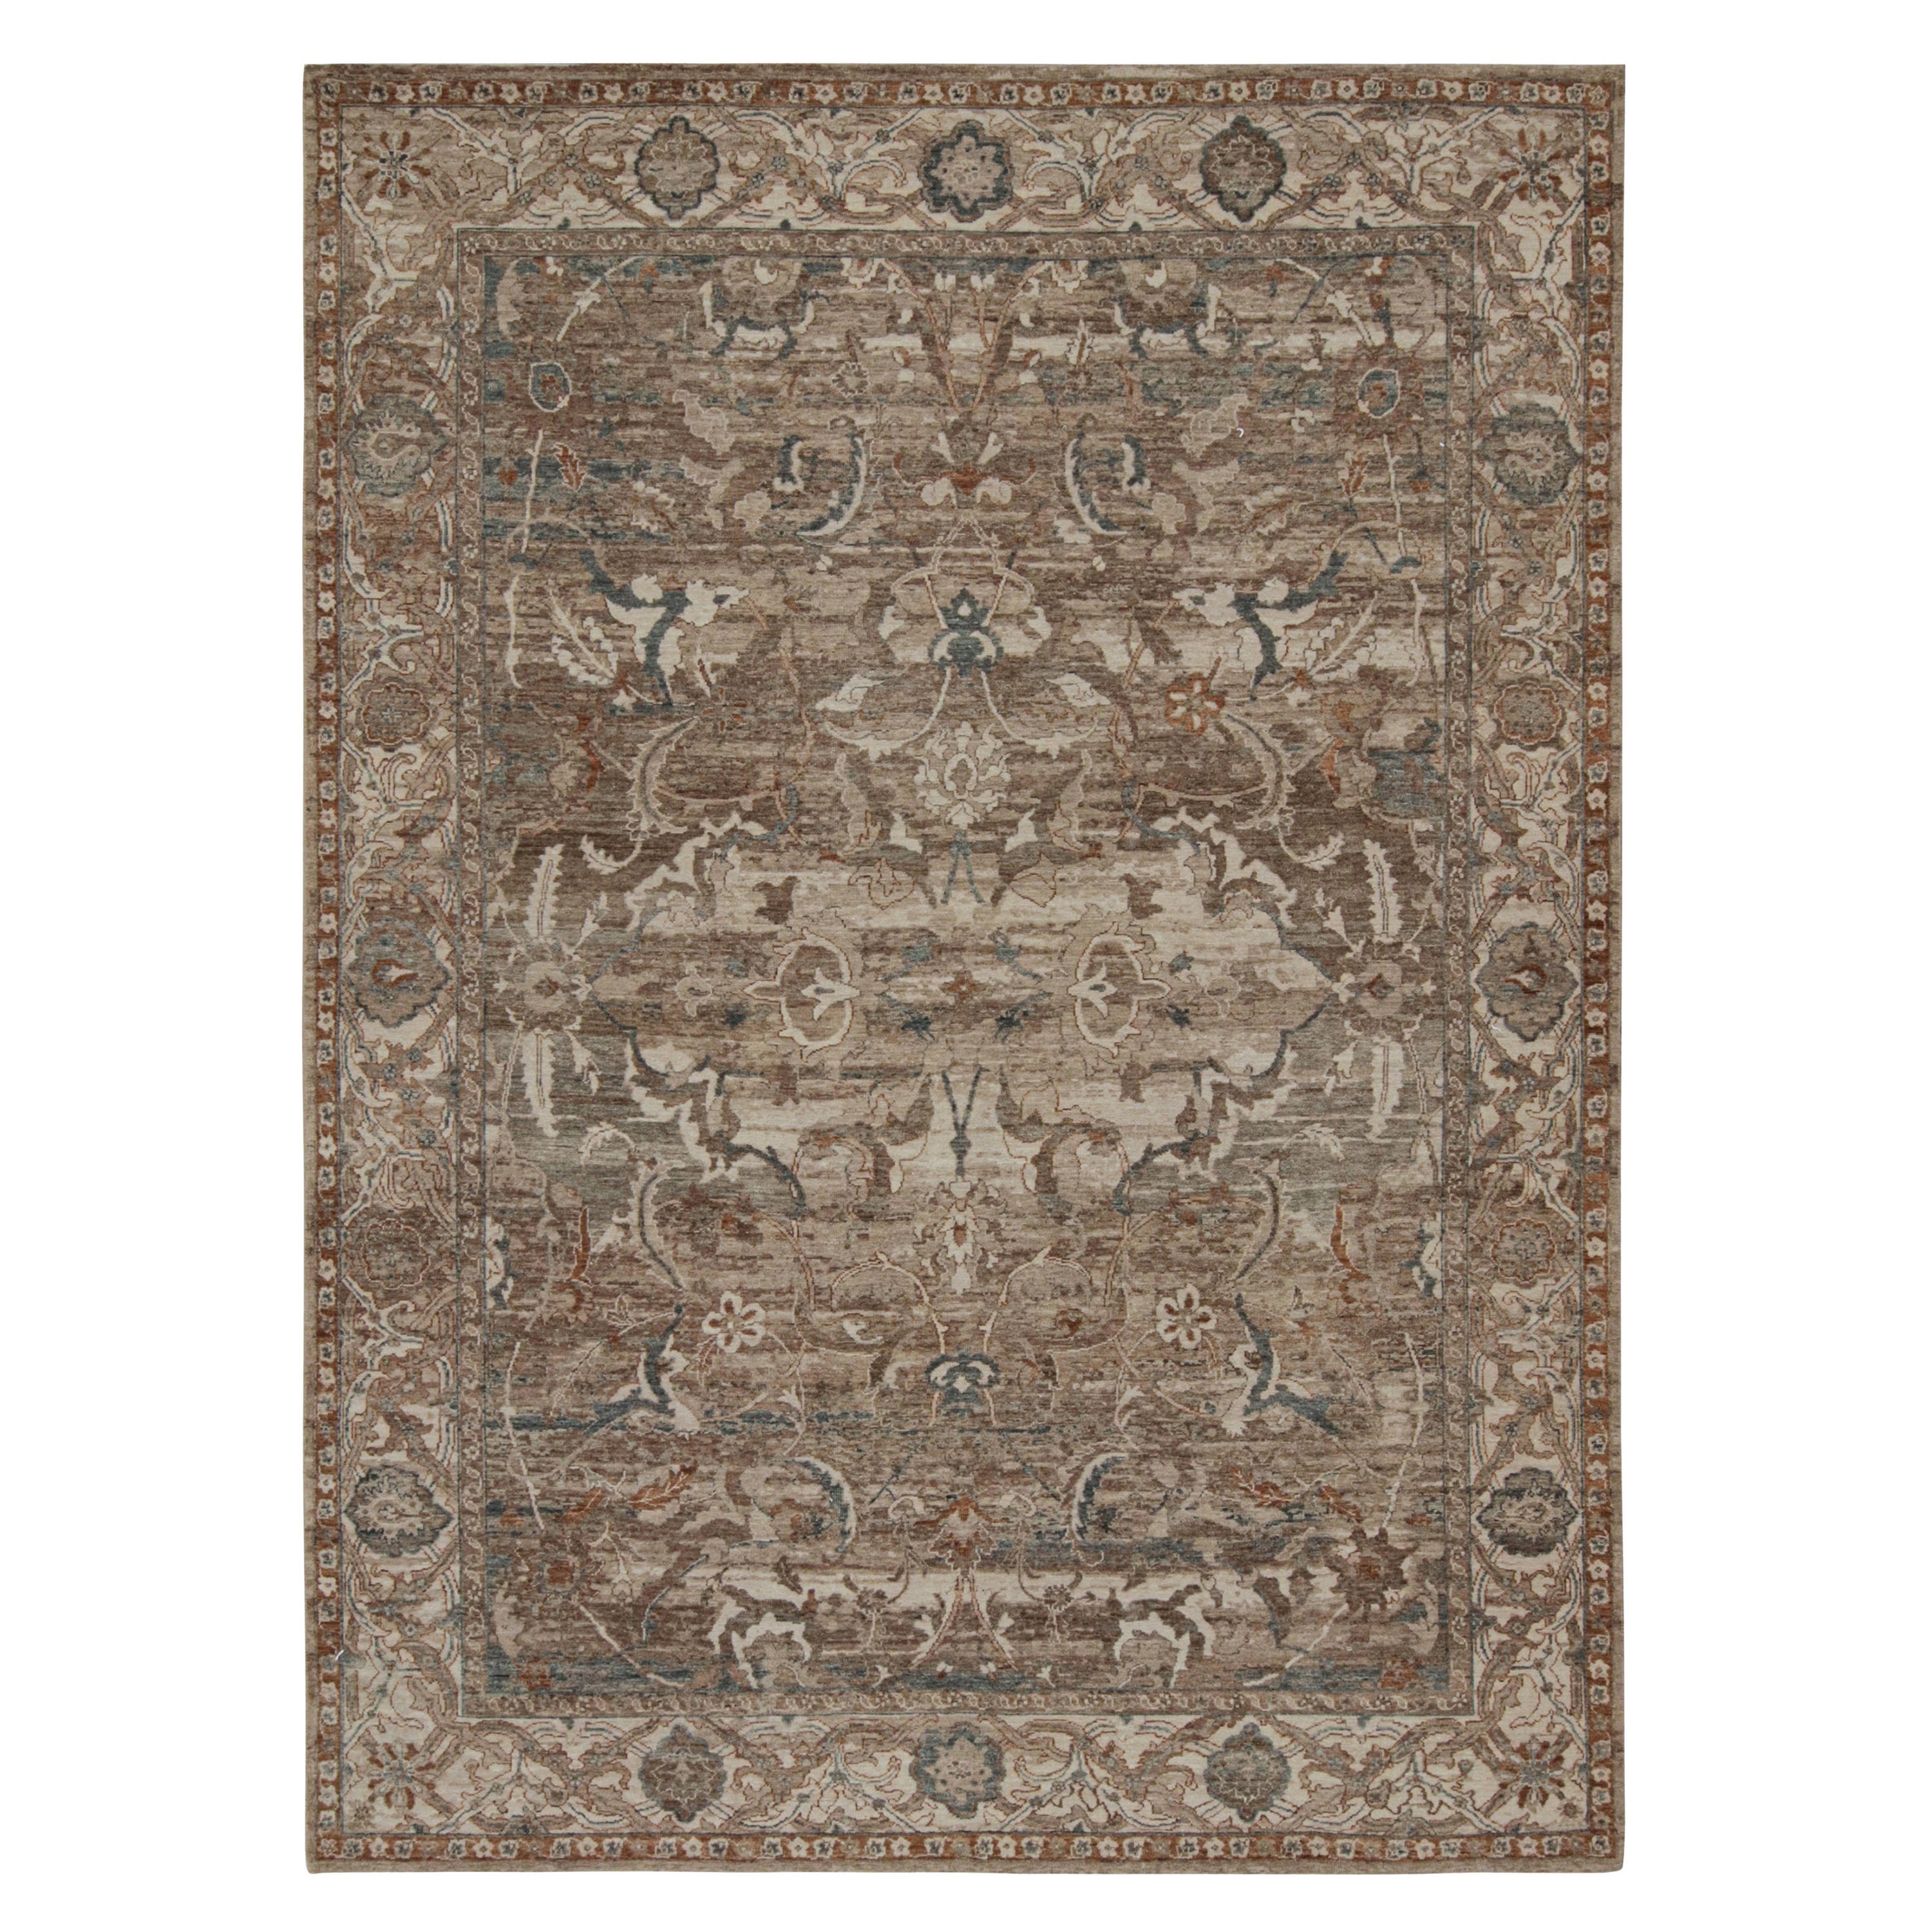 Rug & Kilim’s Modern Classics Rug with Beige-Brown and Navy Blue Floral Patterns For Sale